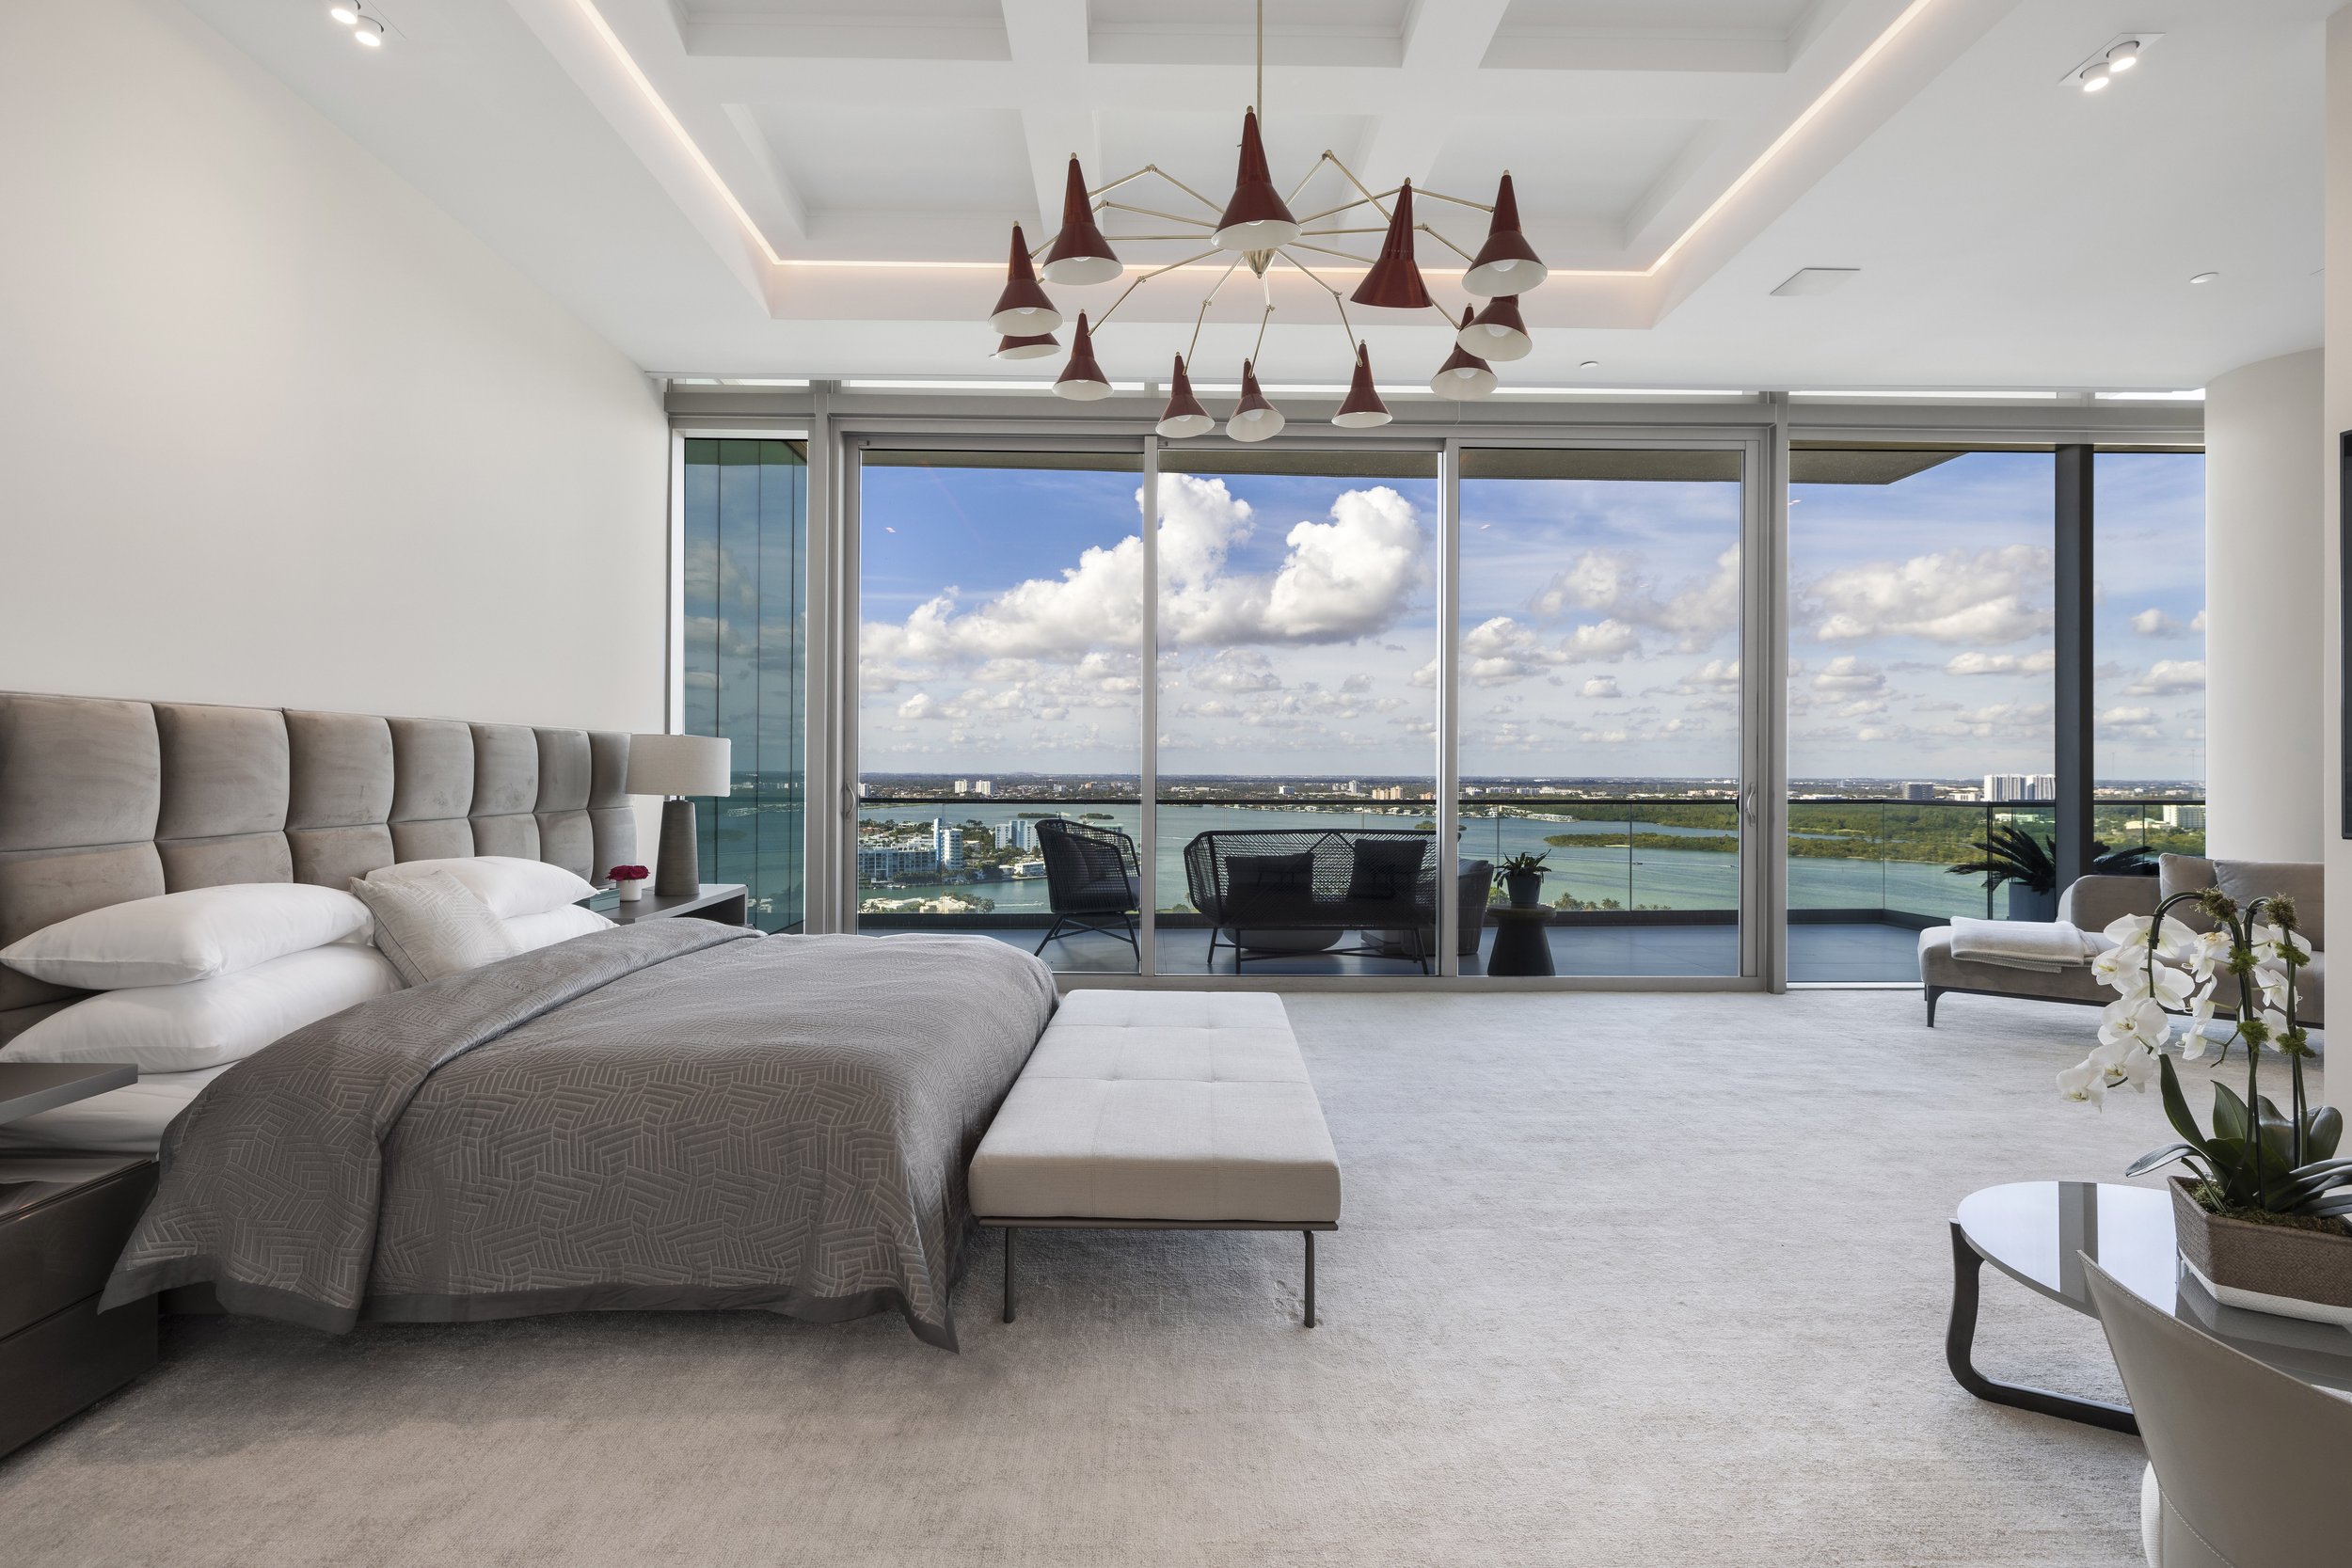 Step Inside This Two-Story Crown Jewel Penthouse At Oceana Bal Harbour Asking $25 Million 215.jpg